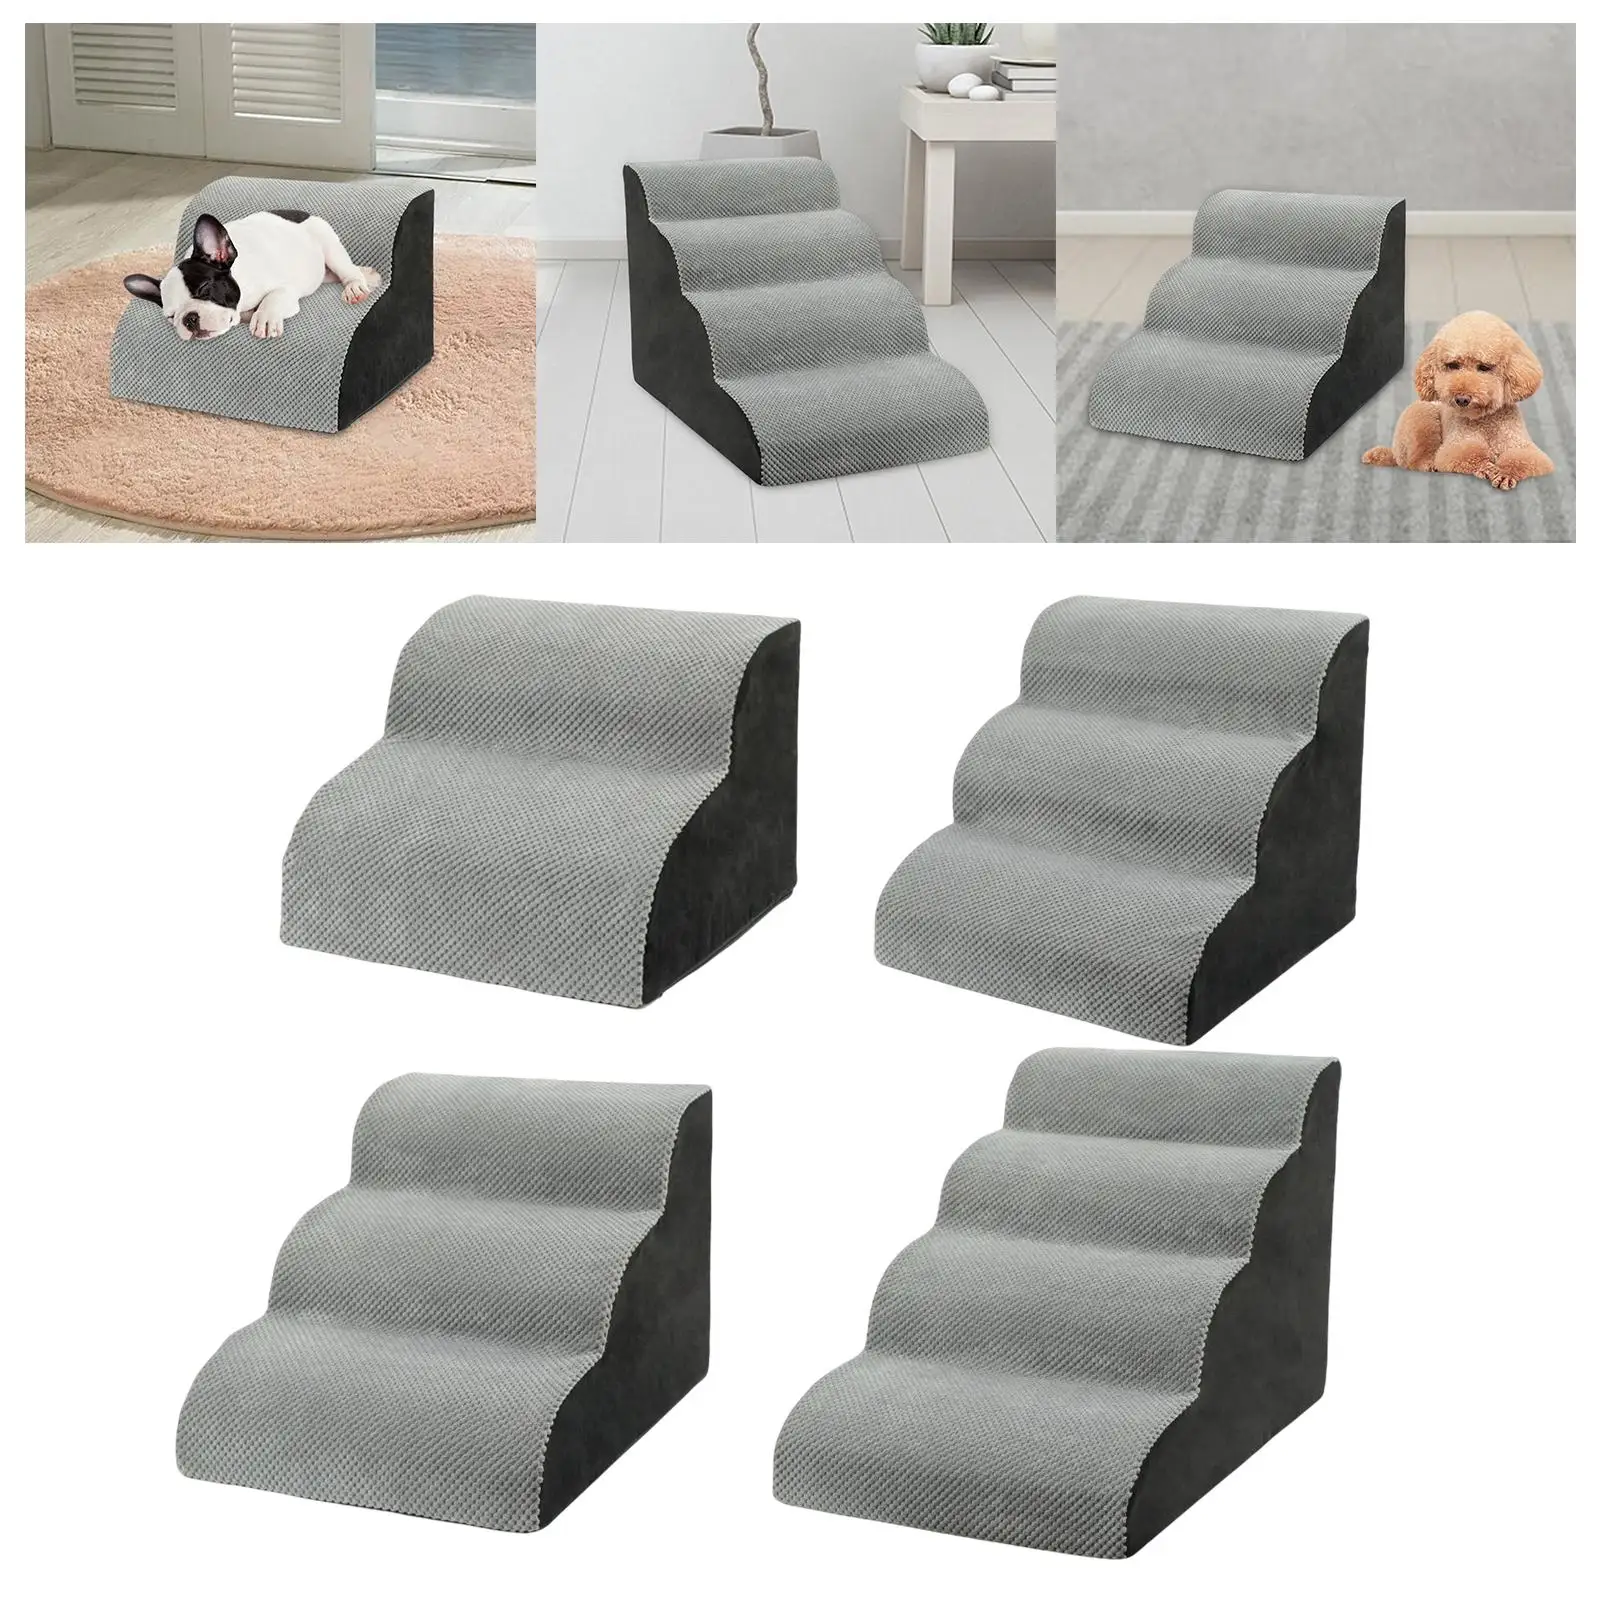 Comfortable Dog Stairs Pet Ladder Ramp Climbing Detachable Cover Extra Wide Slope Dog Bed Stairs Indoor Cats Pets High Bed